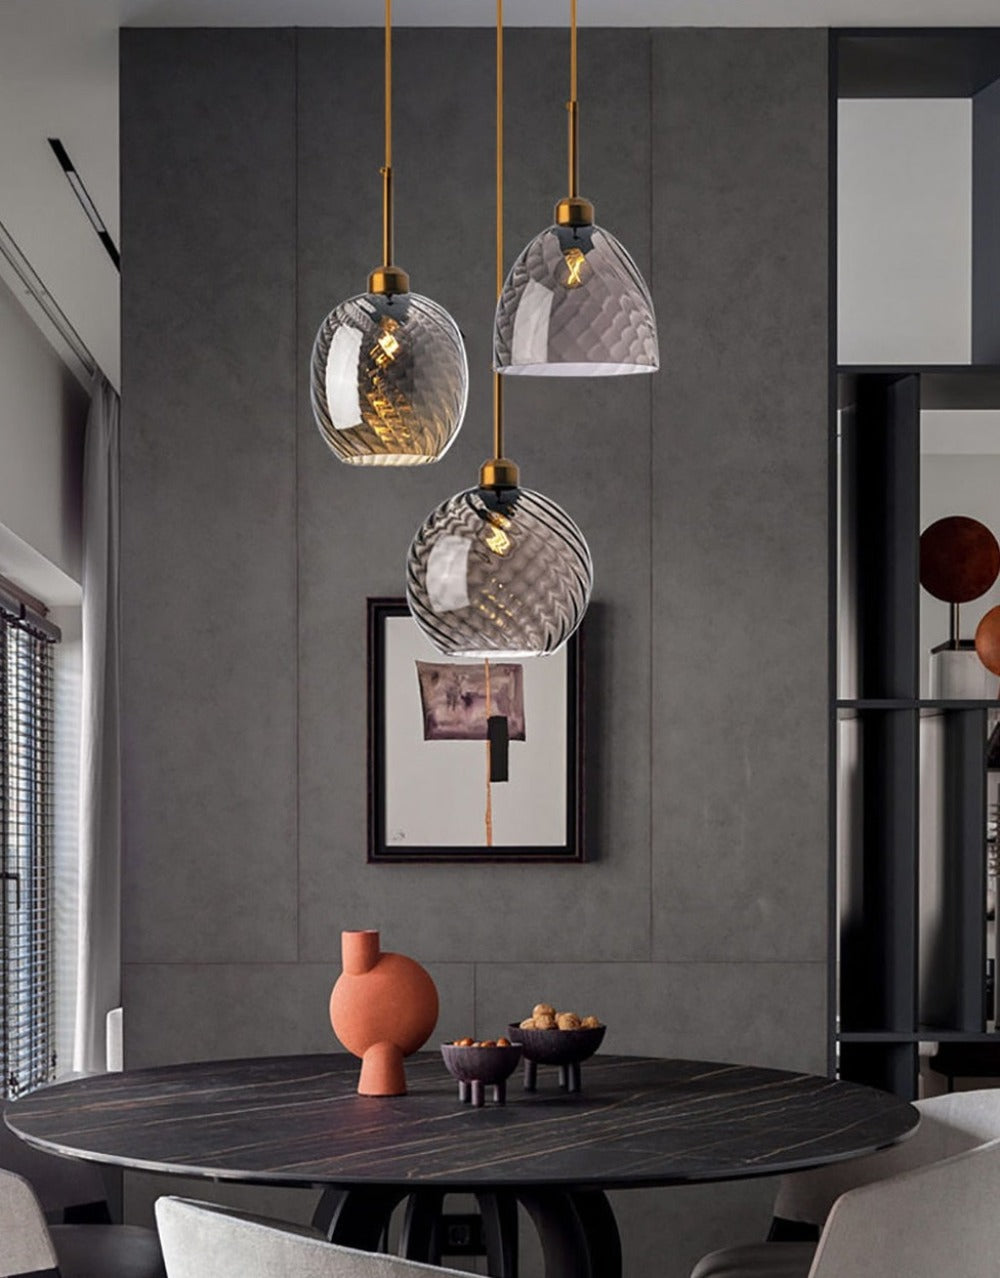 Pendant Light with Gray Glass Globe shown hung over a dining table